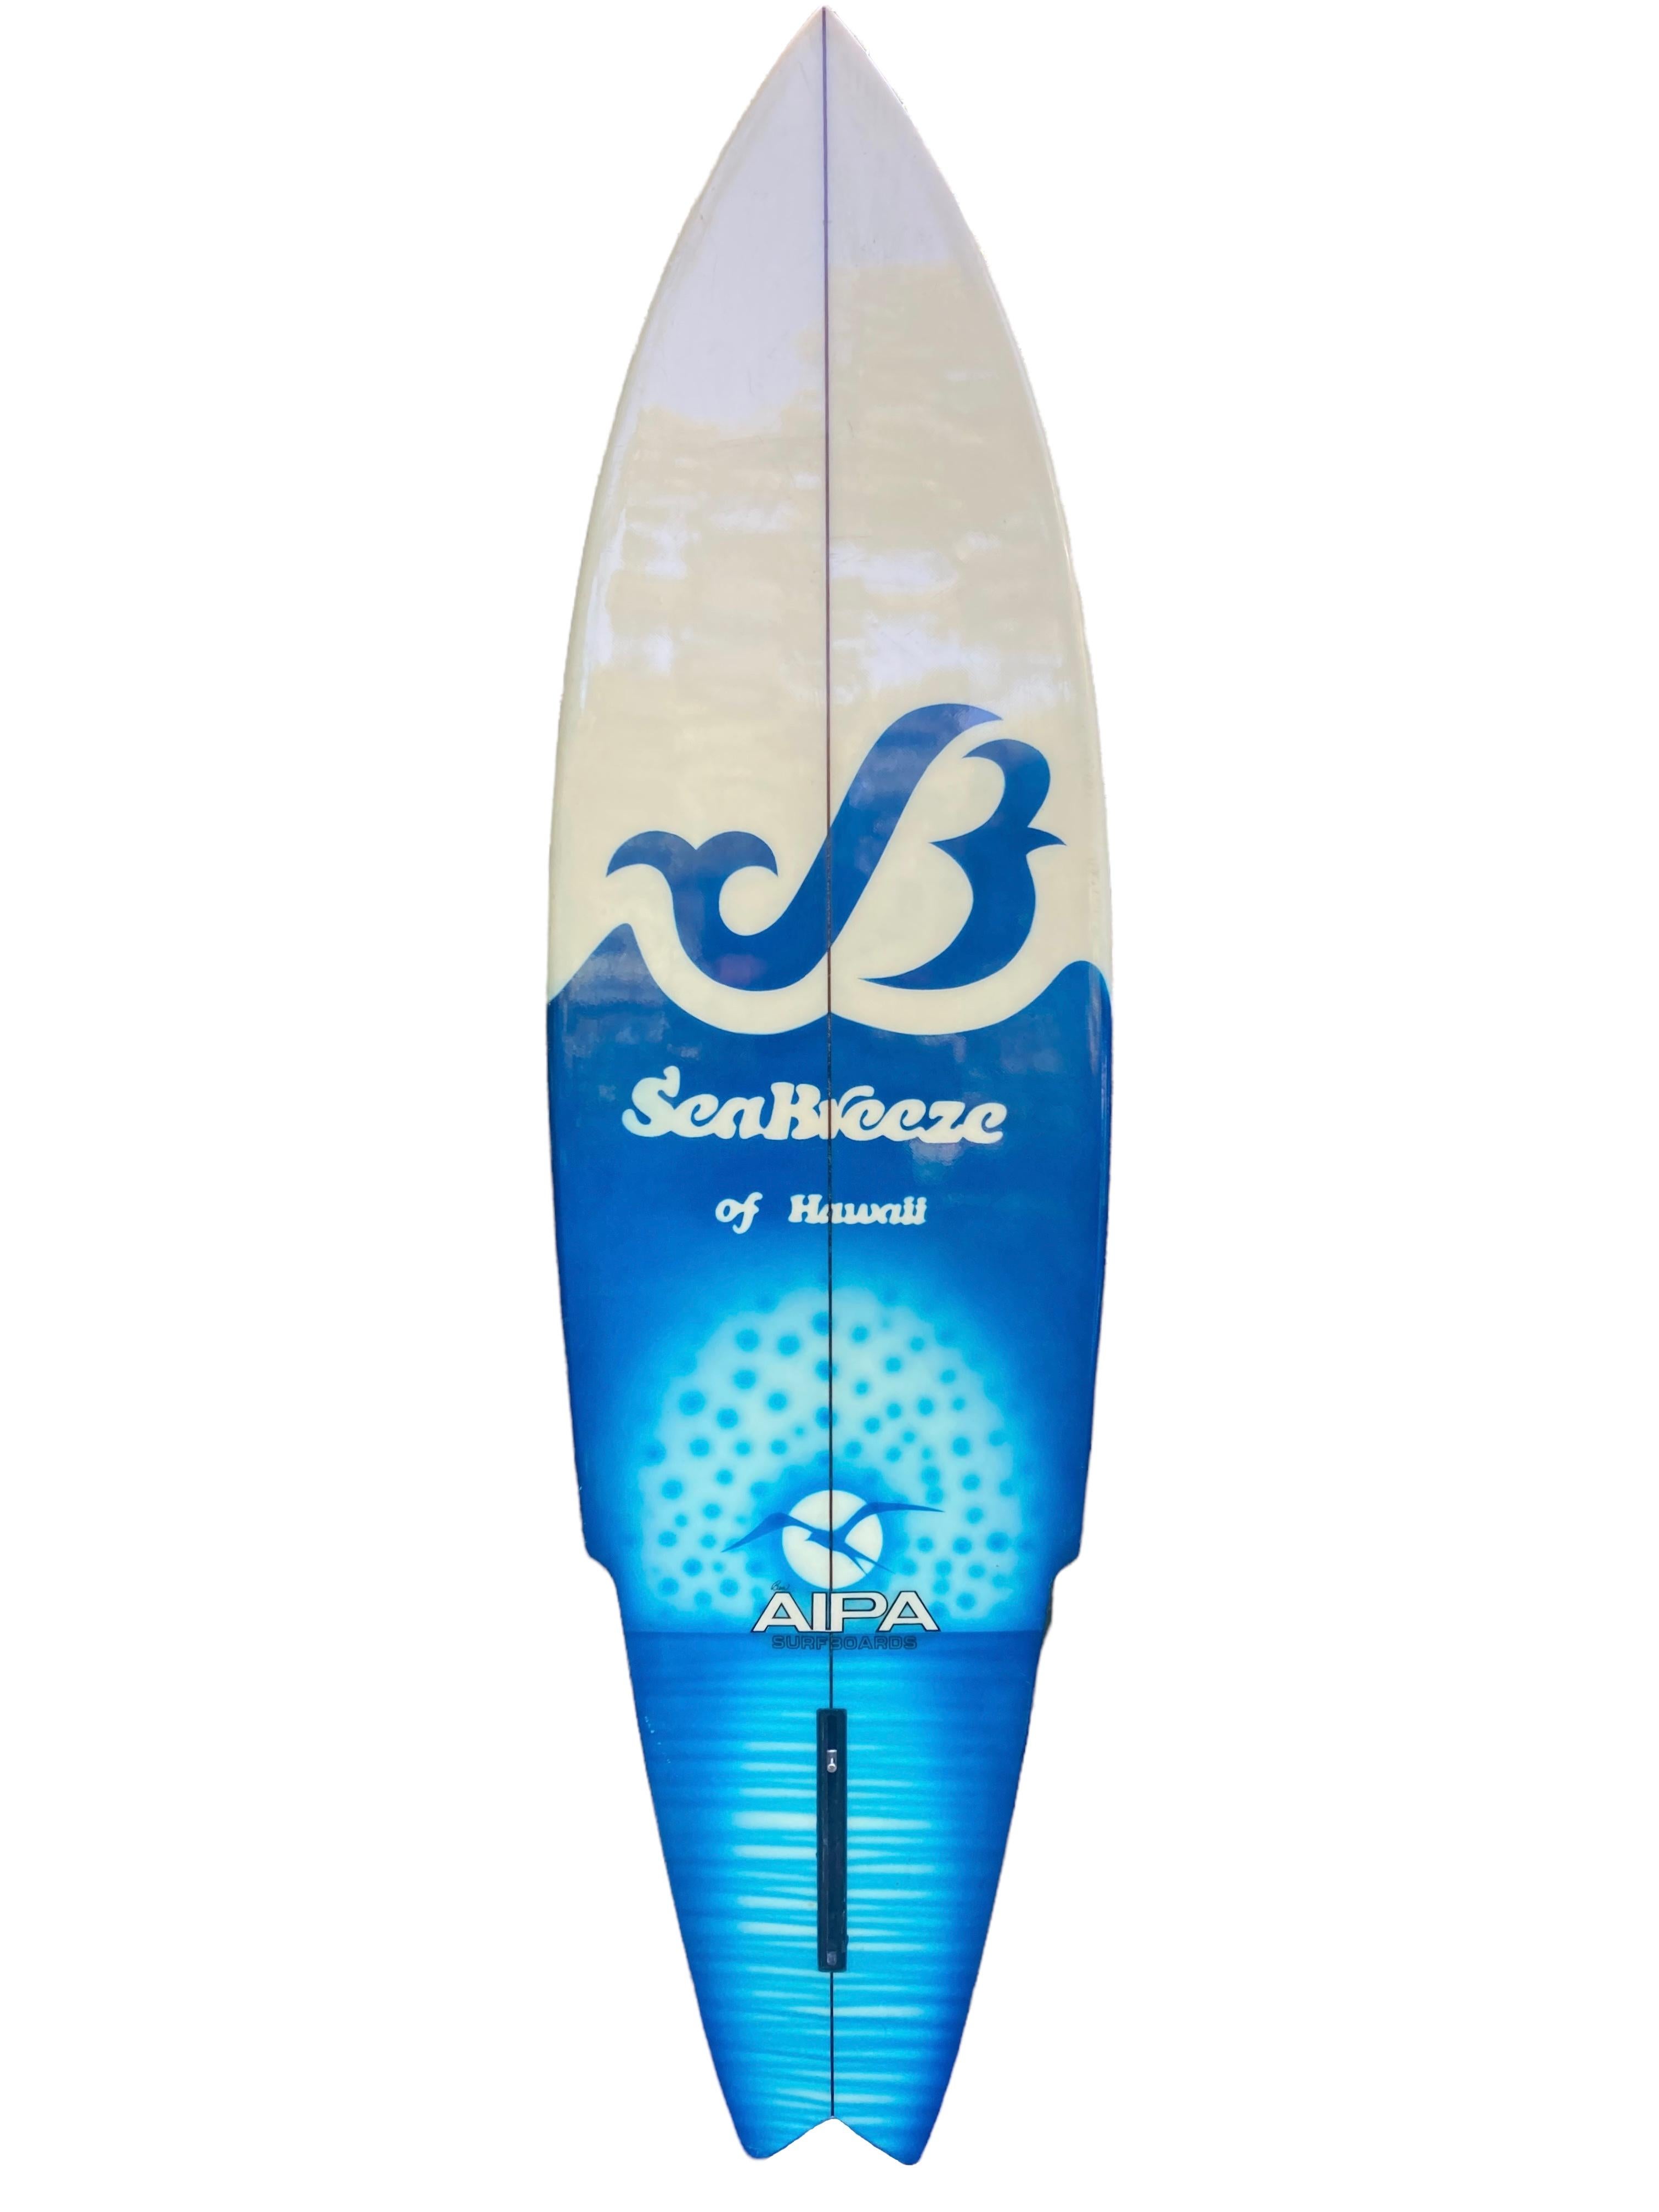 Early-1970s AIPA Surfline-Hawaii sting surfboard shaped by the late Ben Aipa (1942-2021). Features the renowned Sting surfboard shape design with gorgeous “Sea Breeze of Hawaii” airbrush artwork. An astoundingly well preserved example of an early